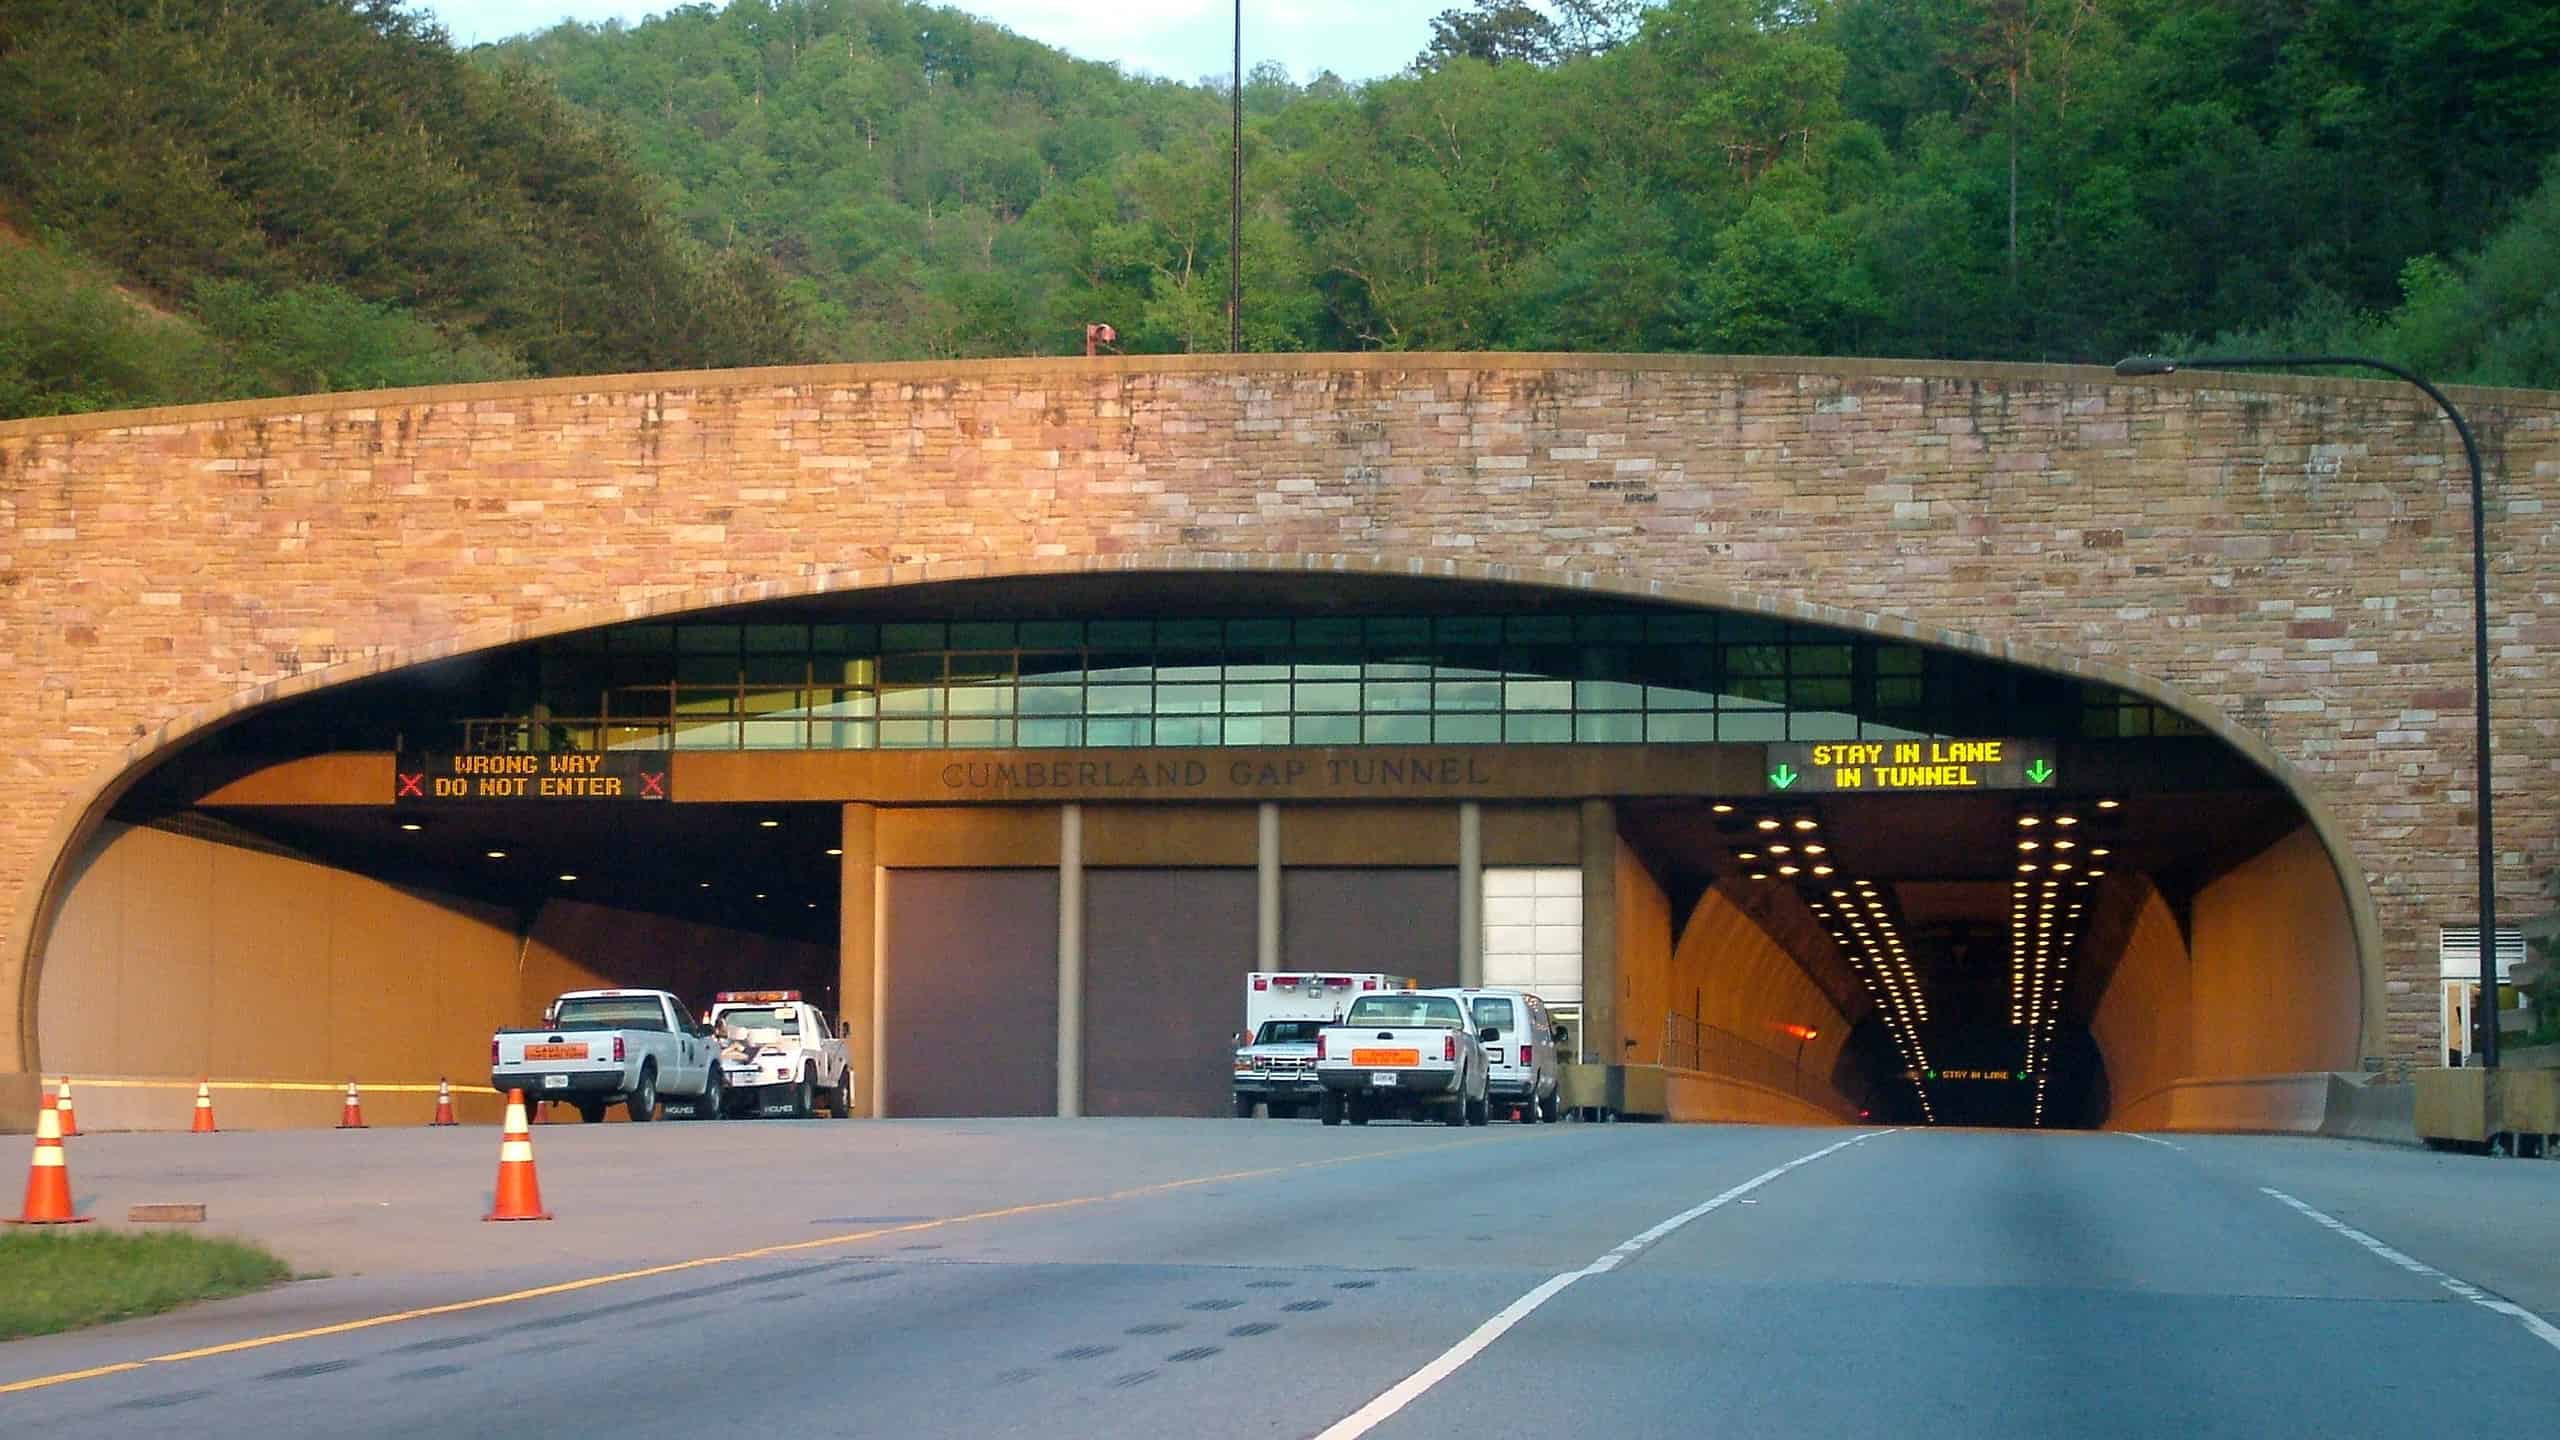 Photo of the Cumberland Gap Tunnel from the Kentucky side.